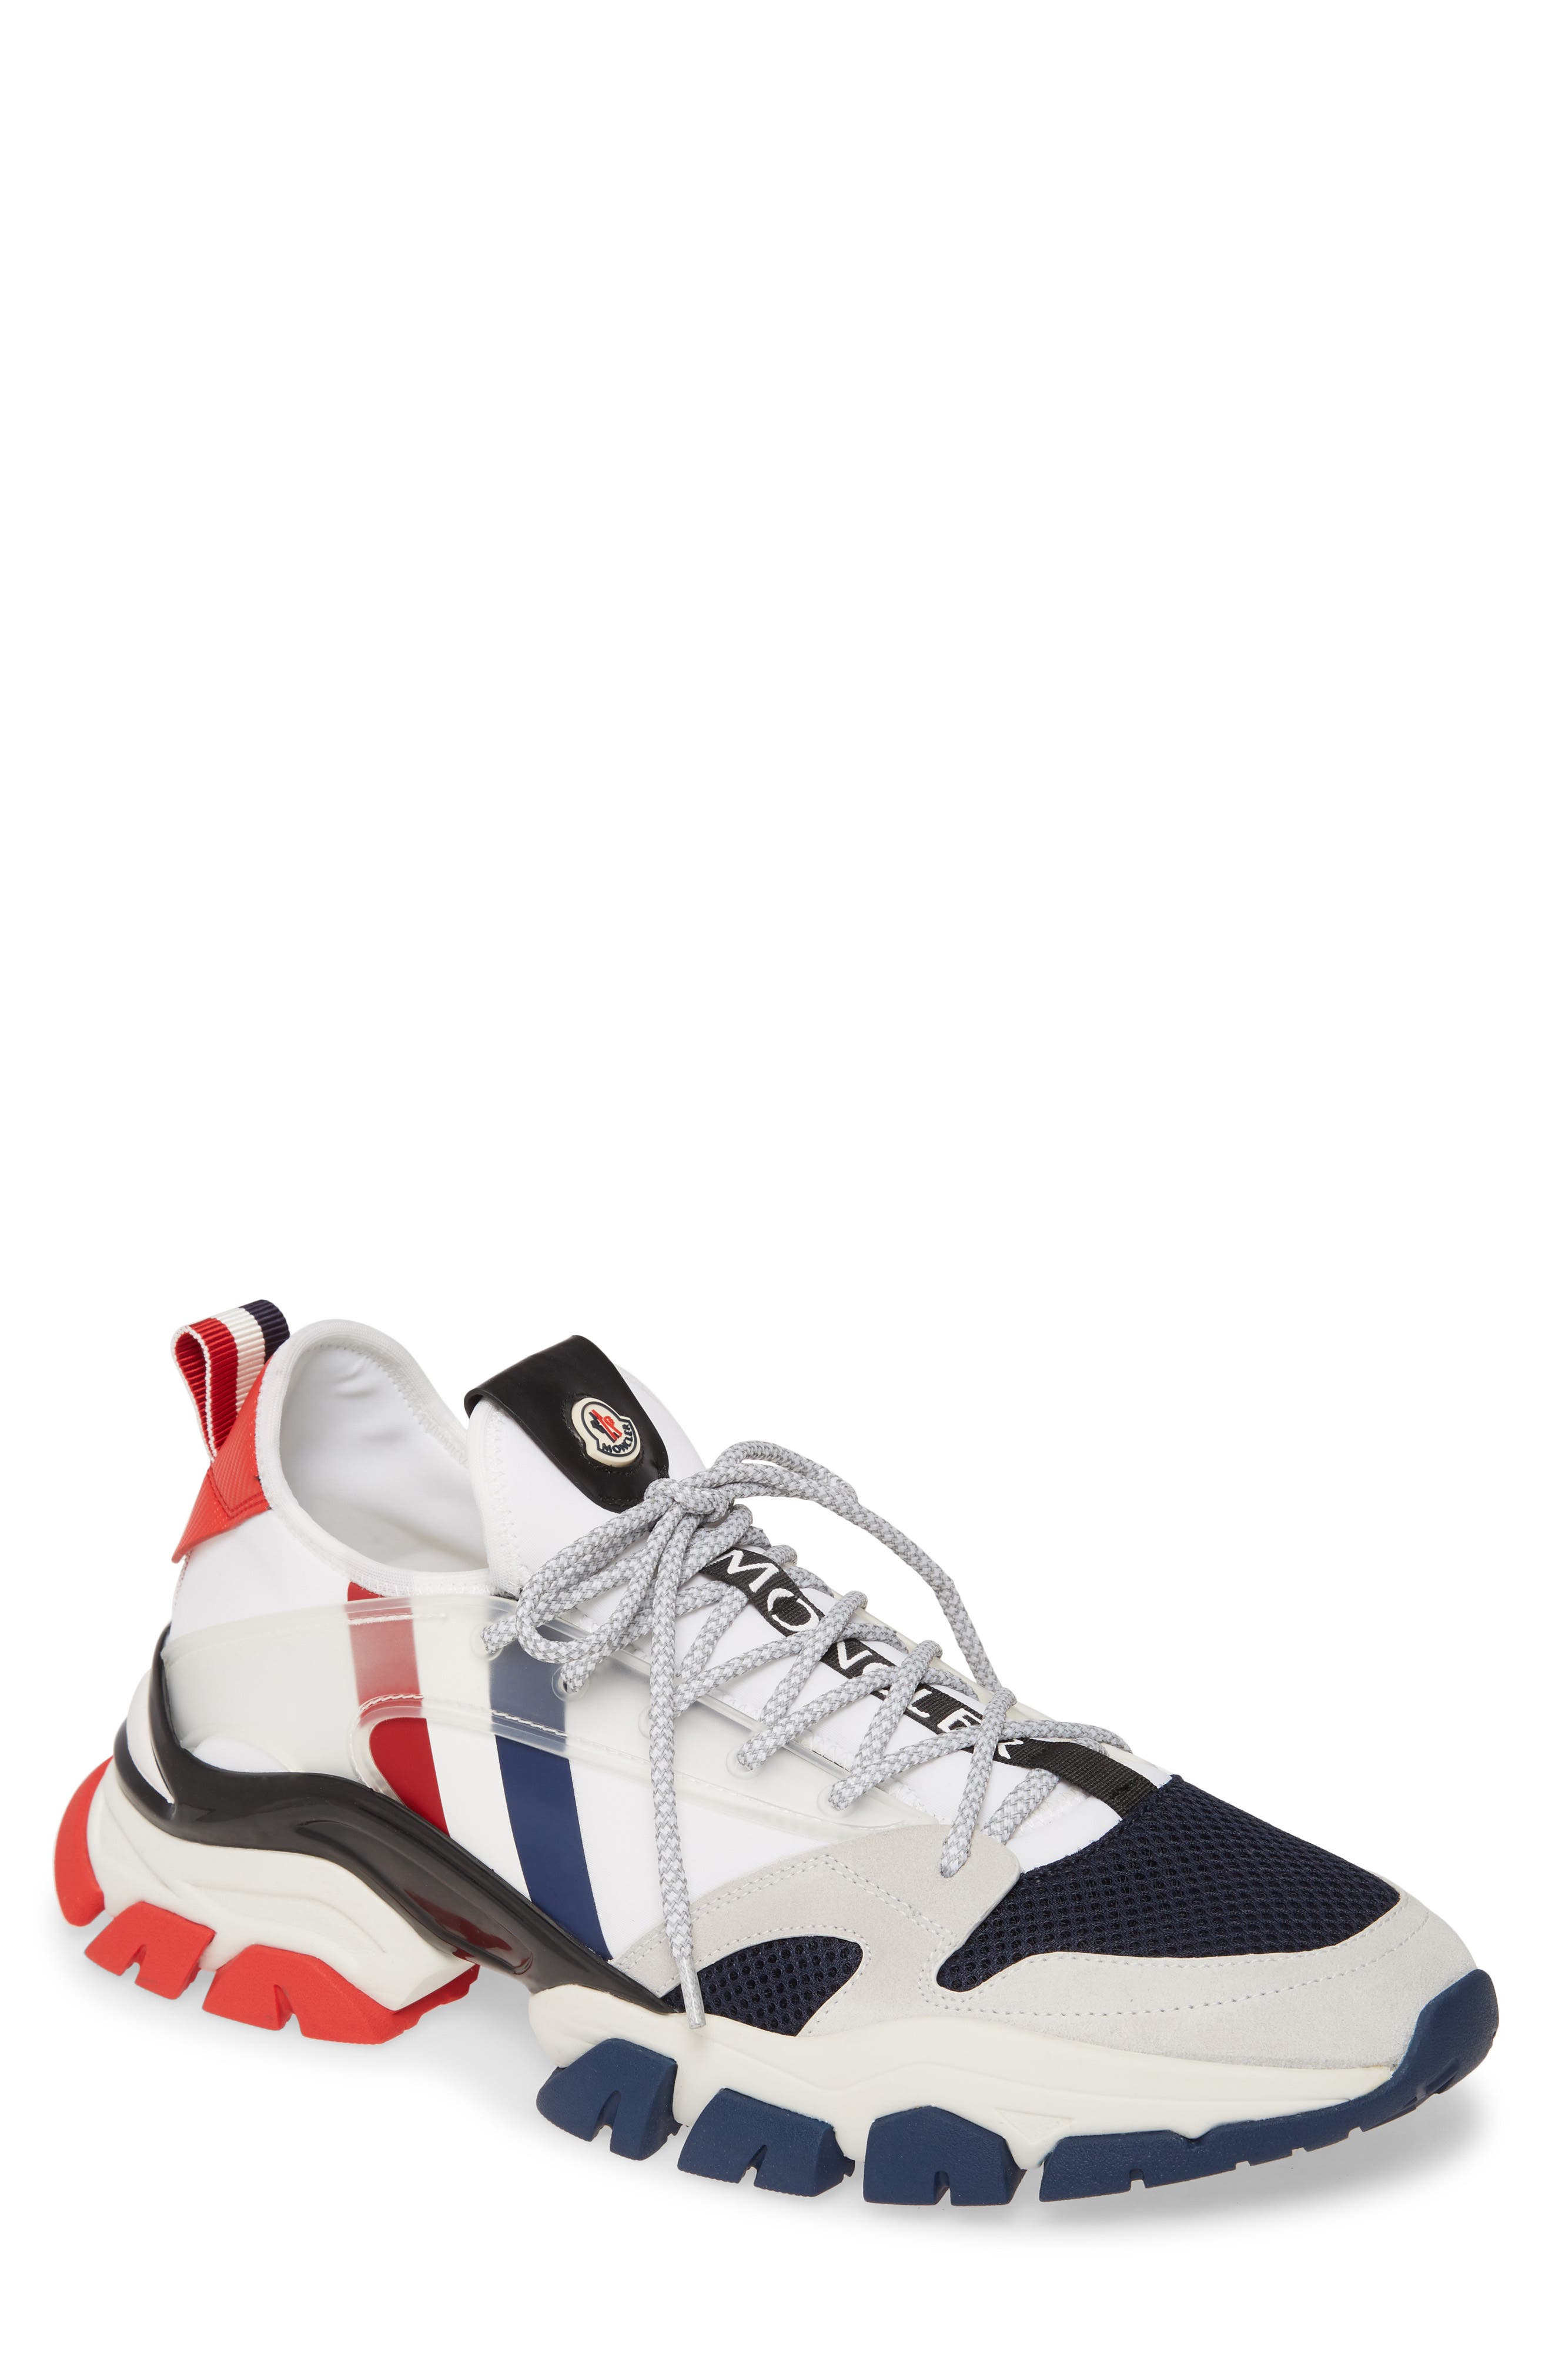 moncler shoes price